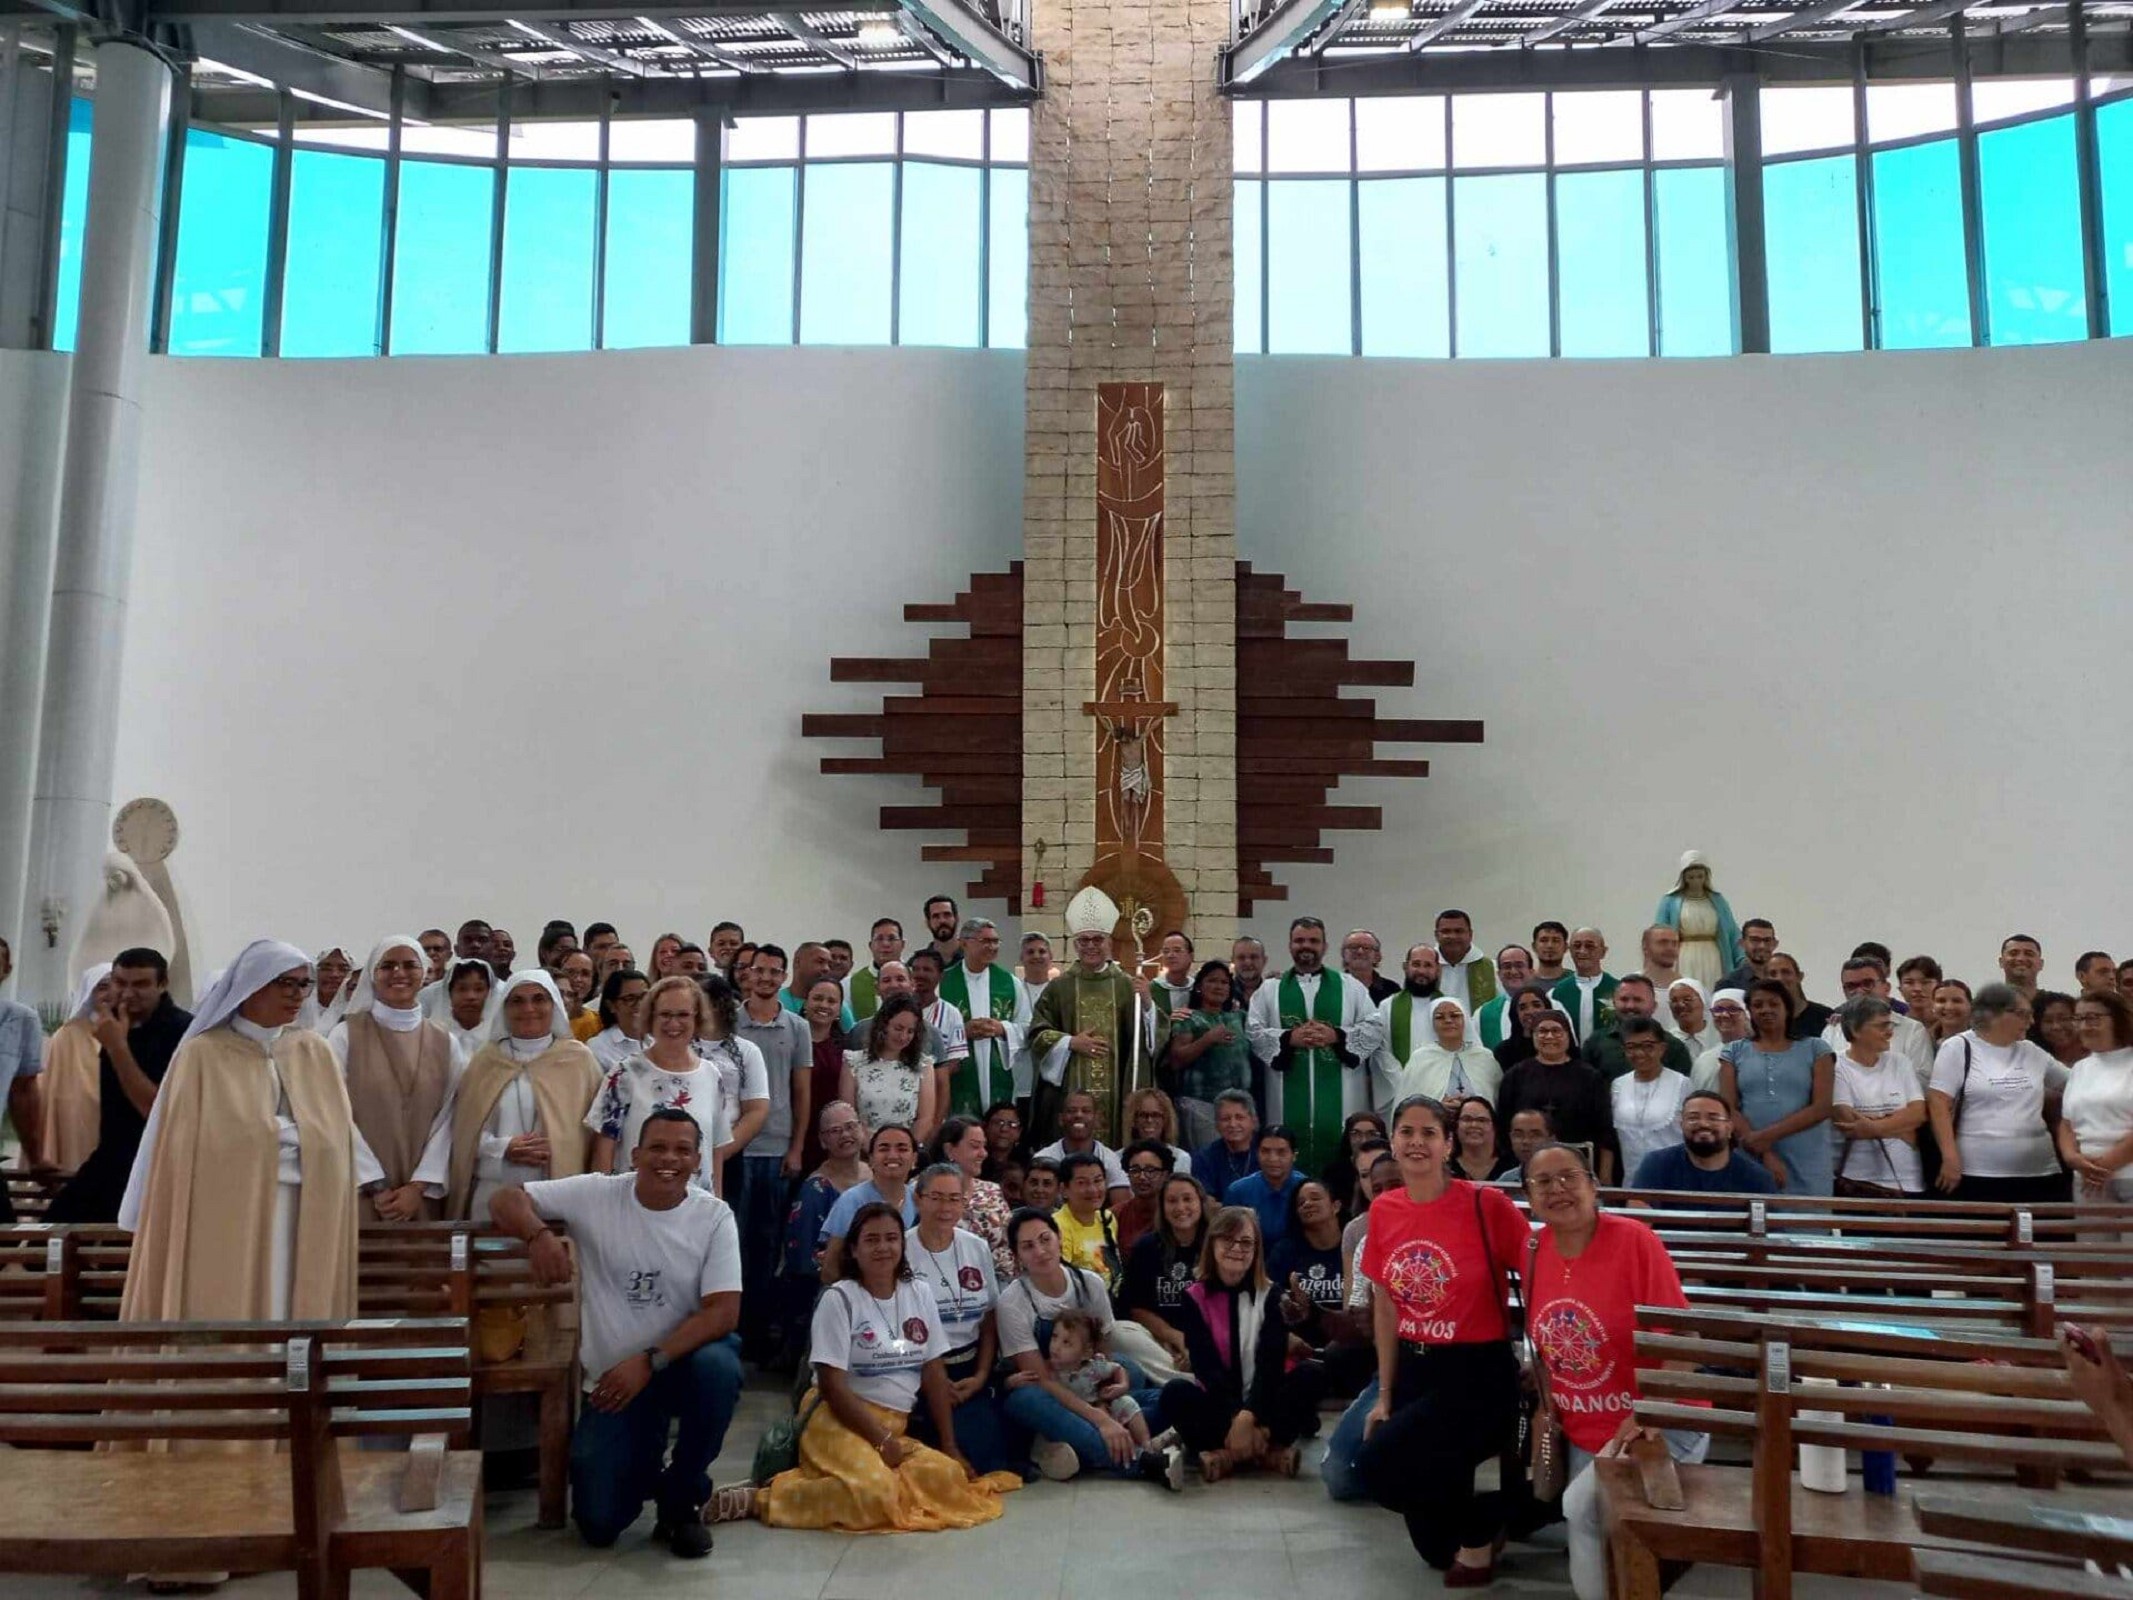 Meeting of the Social Apostolate Commission in Rio de Janeiro